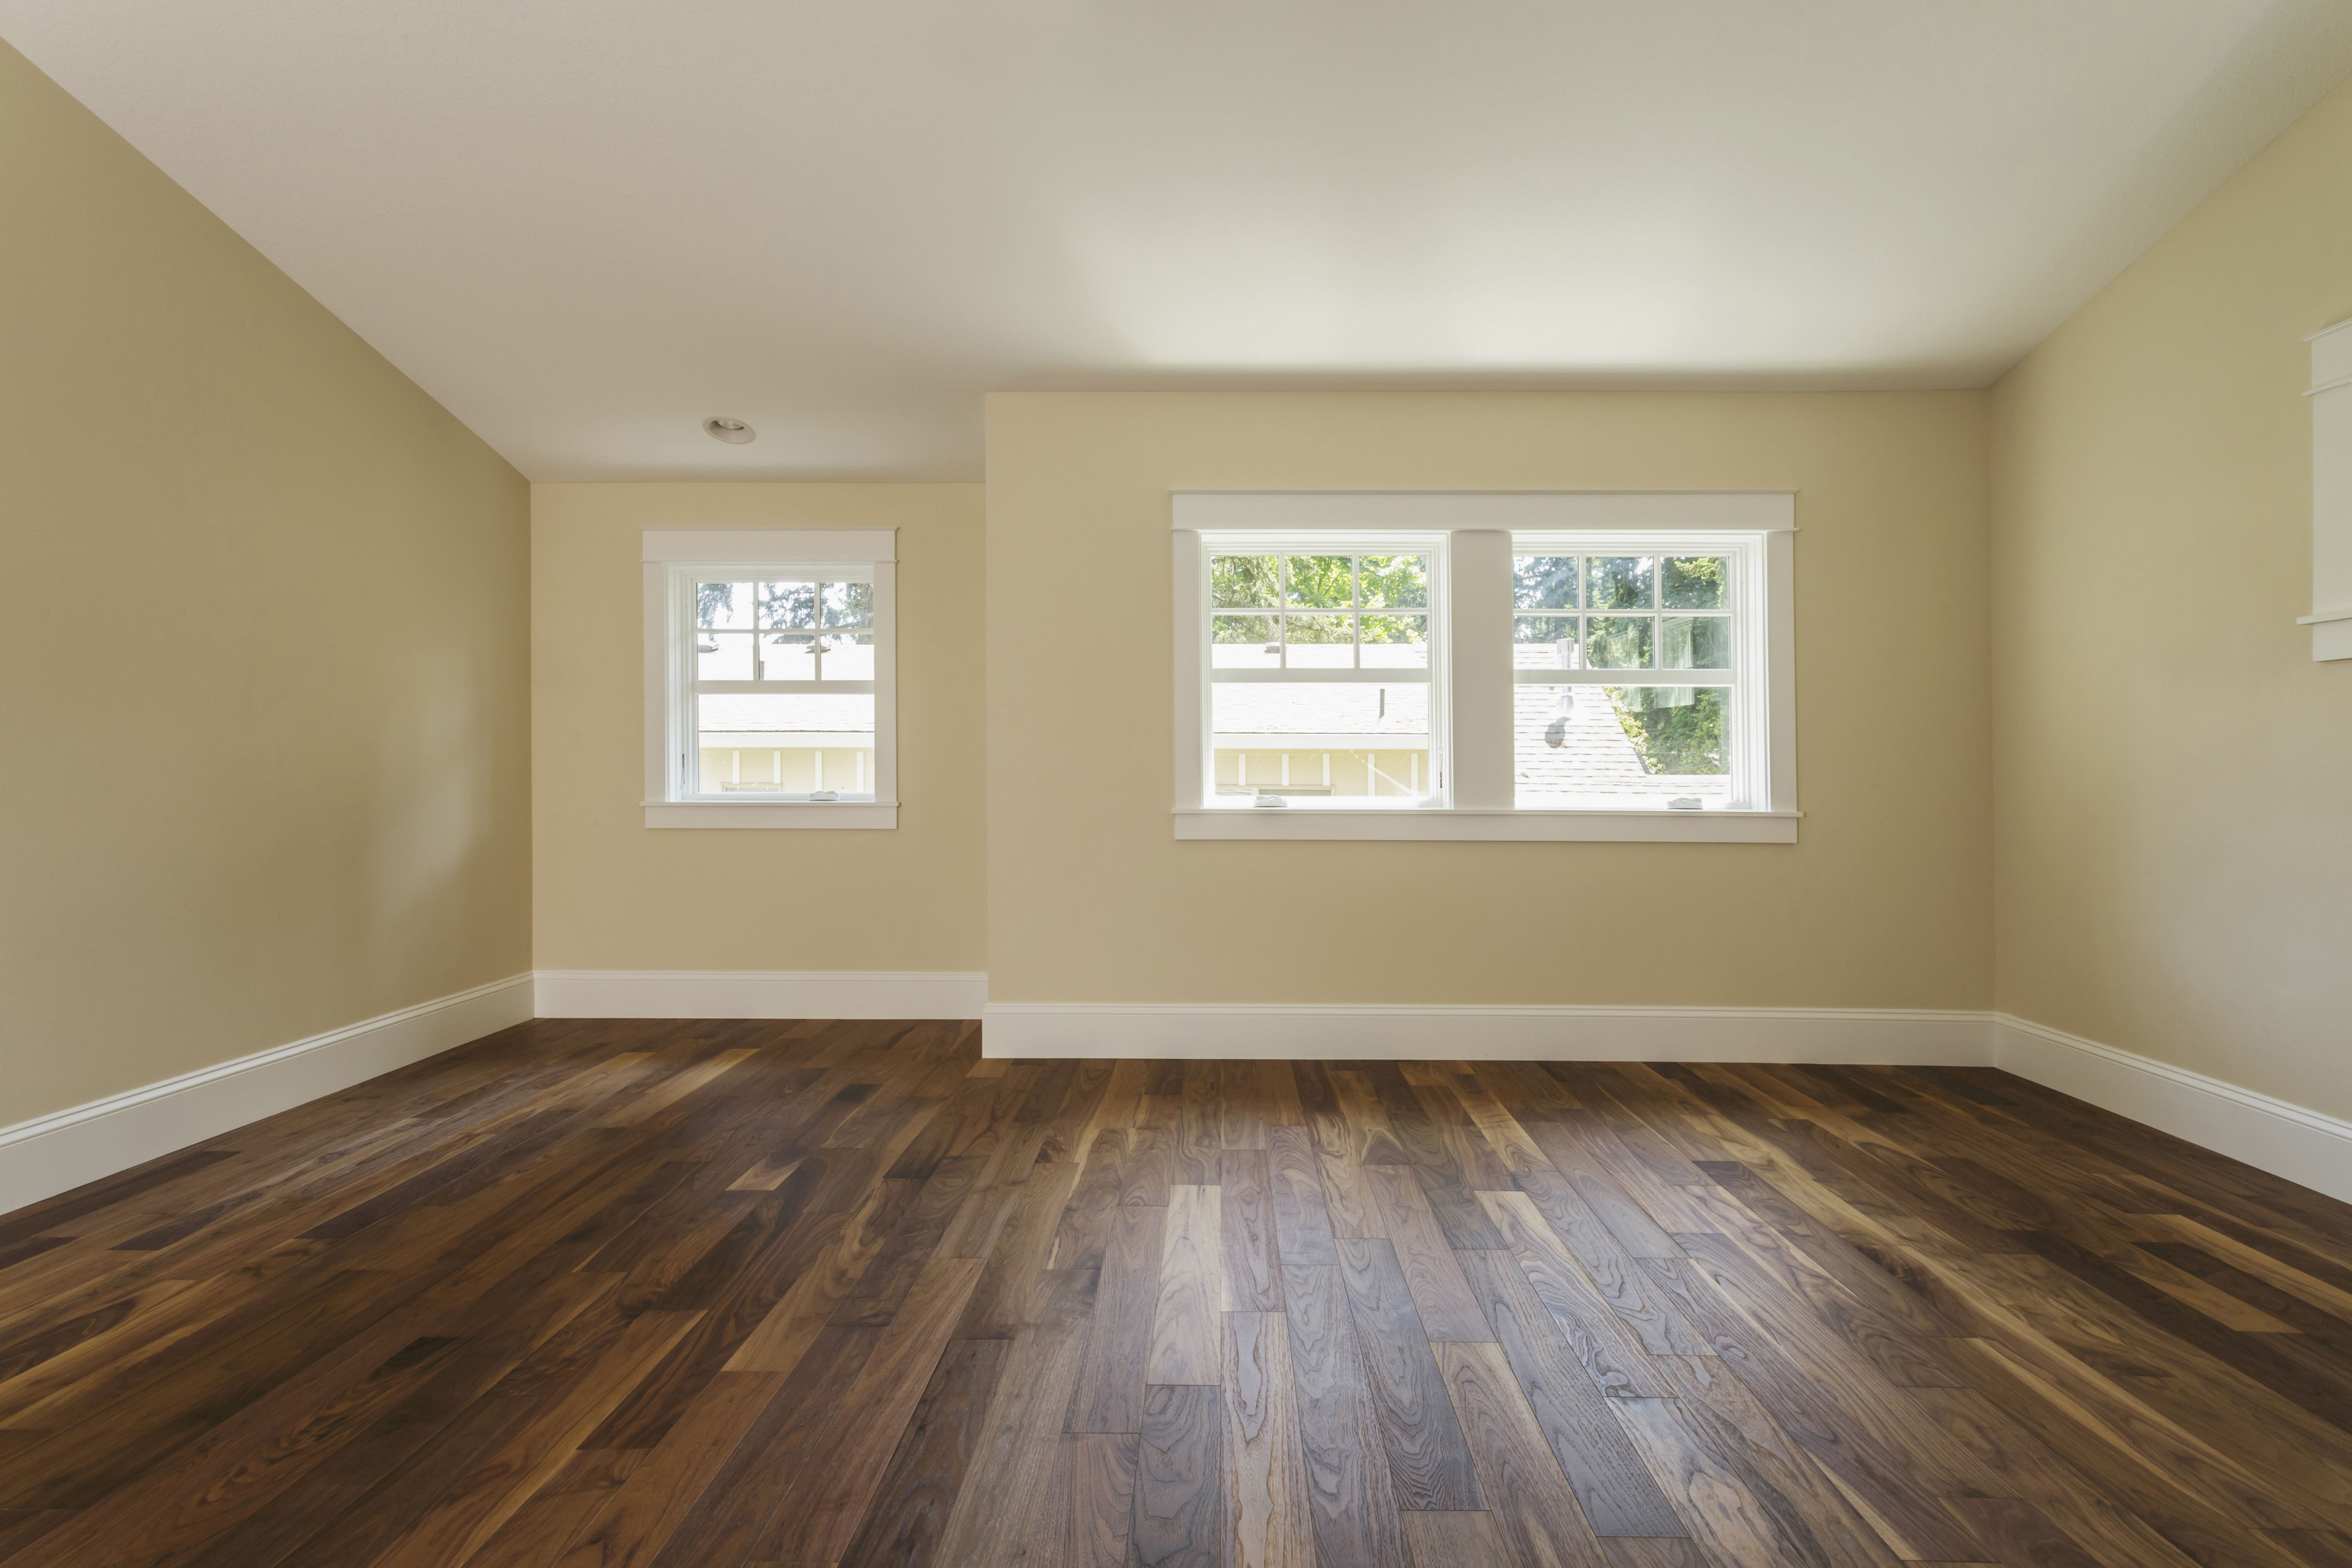 25 Spectacular How to Put Down Hardwood Floors Video 2024 free download how to put down hardwood floors video of its easy and fast to install plank vinyl flooring regarding wooden floor in empty bedroom 482143001 588bd5f45f9b5874eebd56e9